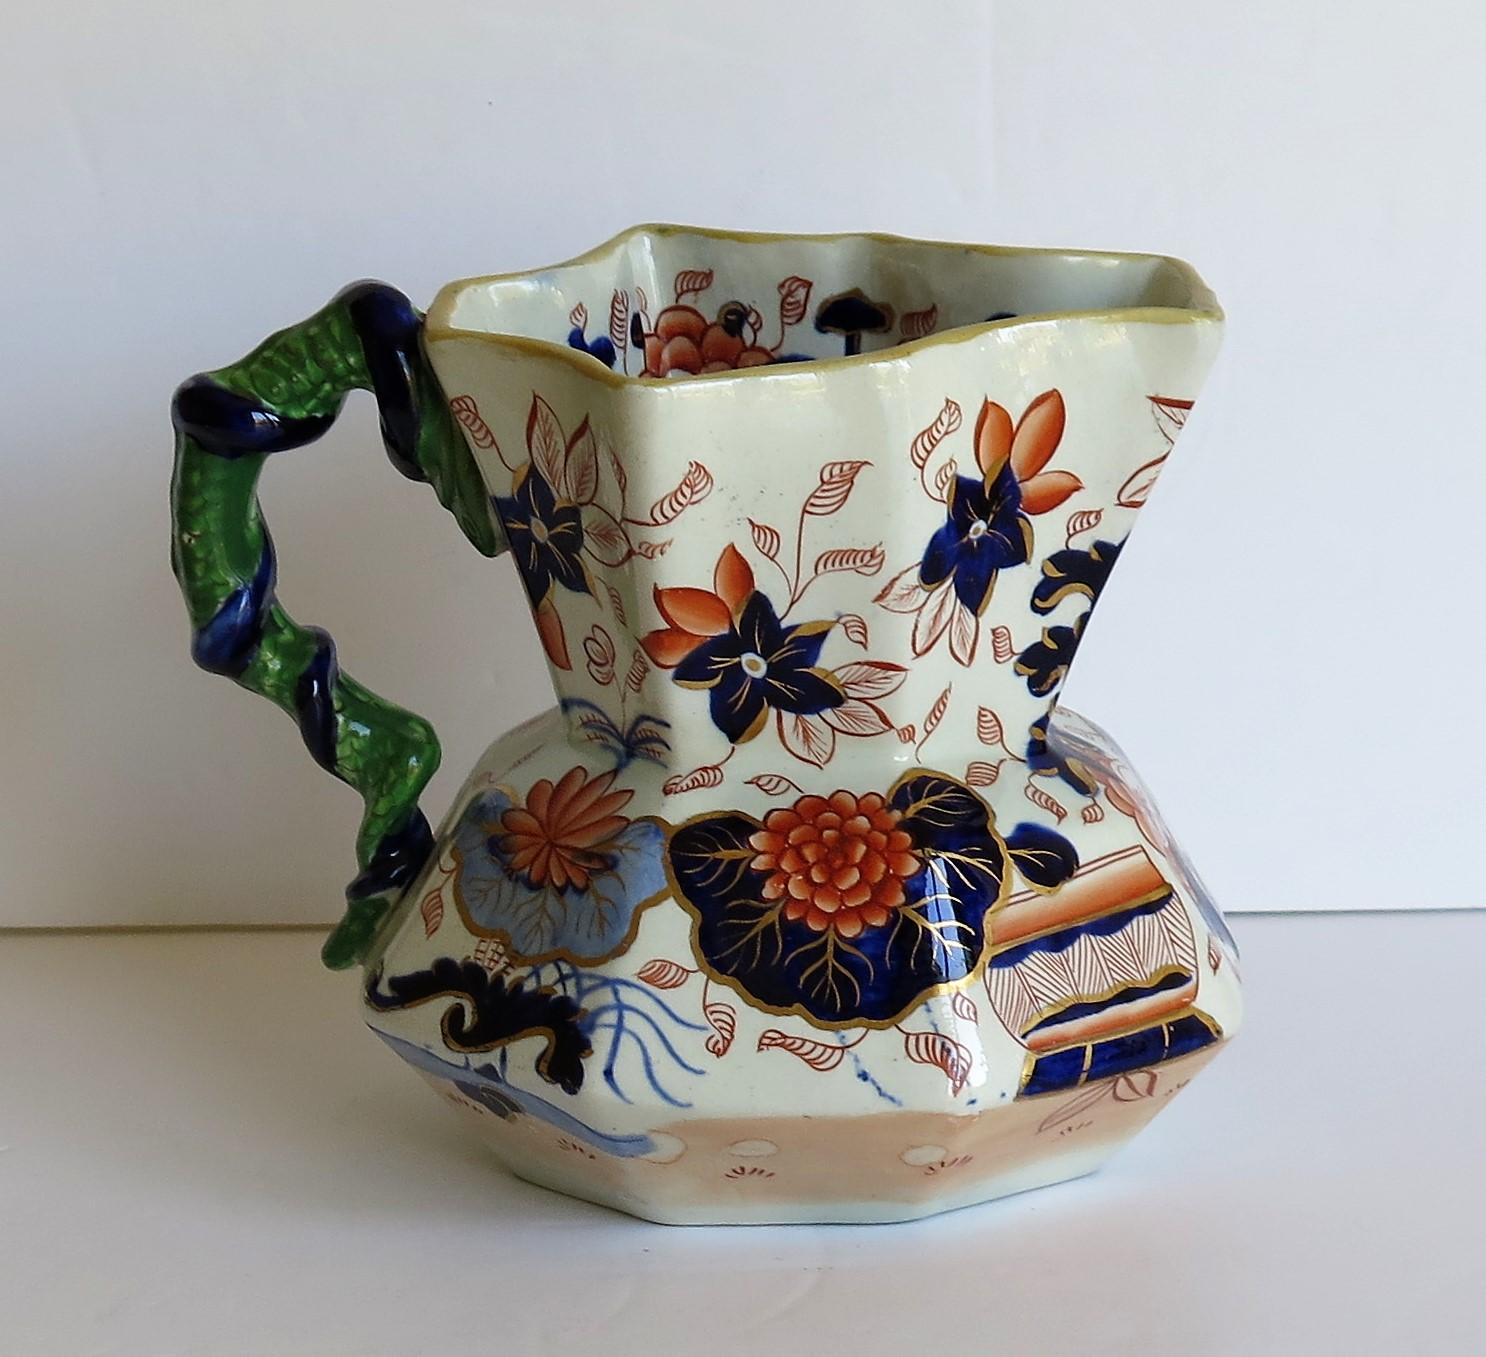 This is a very good, early Staffordshire Potteries Ironstone Hydra jug in the Japan Basket pattern with an unusual intertwined snake handle, circa 1820-1825, English late Georgian period.

The jug has an octagonal shape with a very unusual handle of